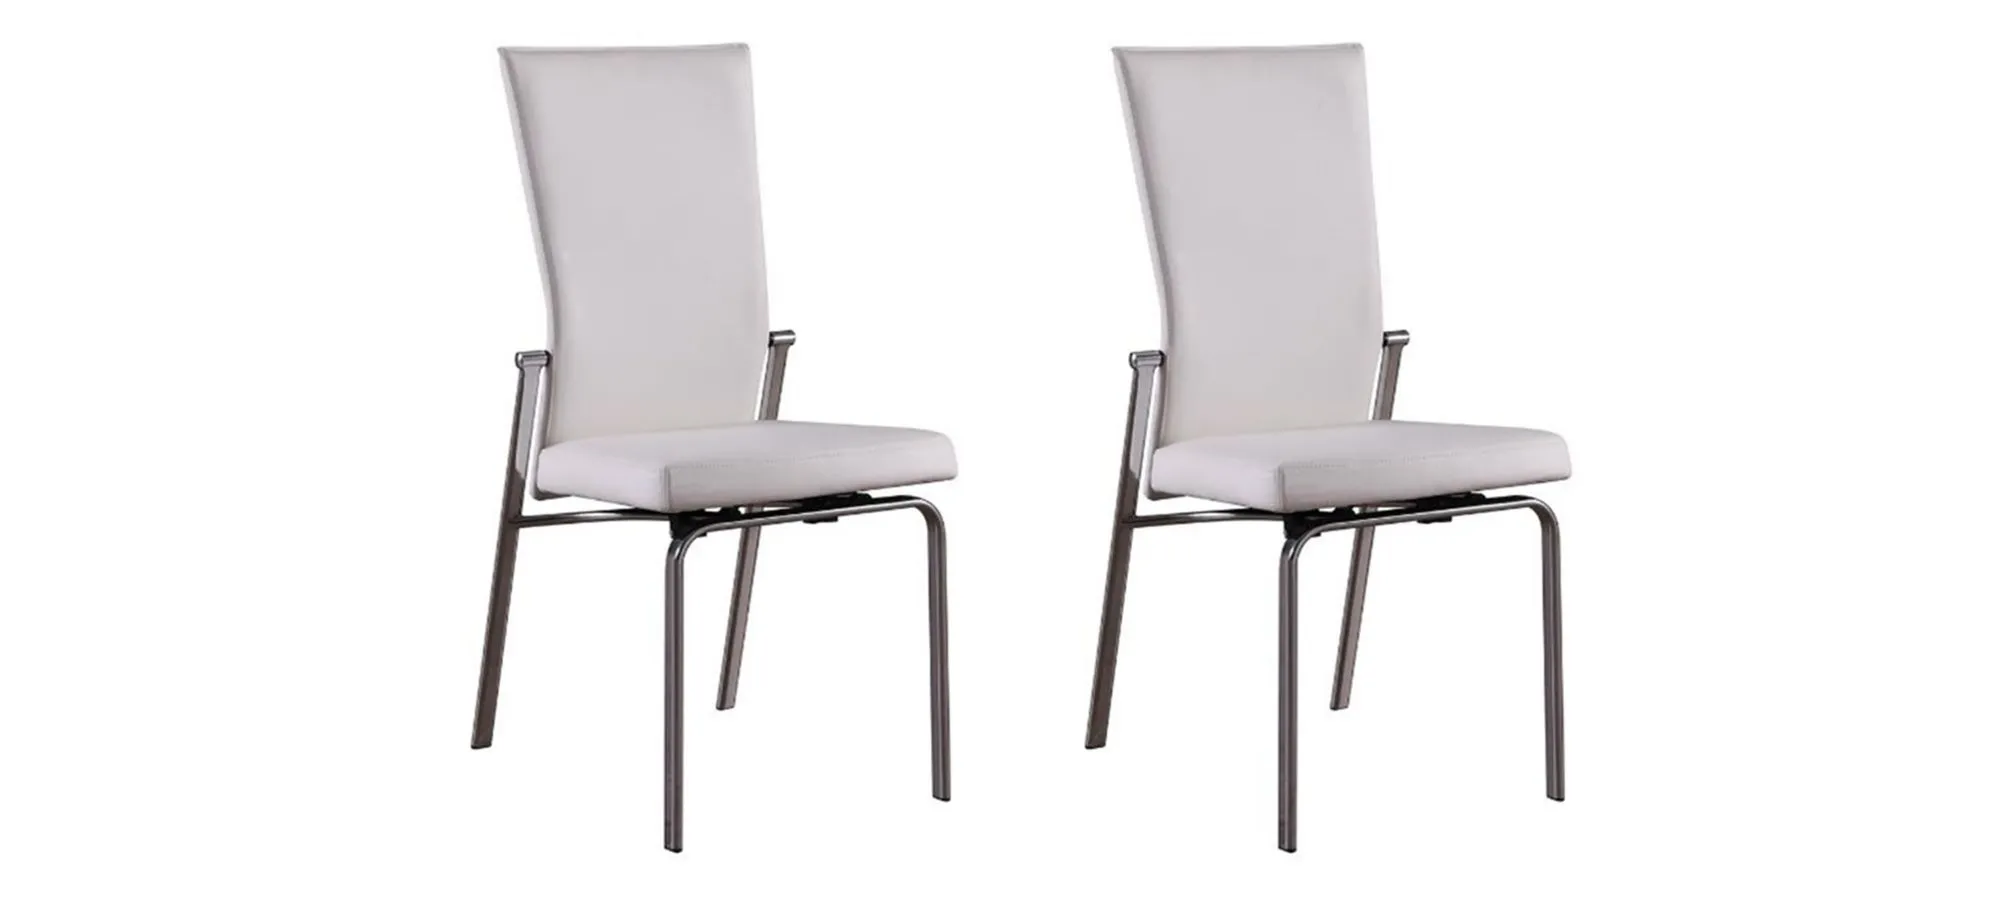 Paloma Dining Chair - Set of 2 in White by Chintaly Imports